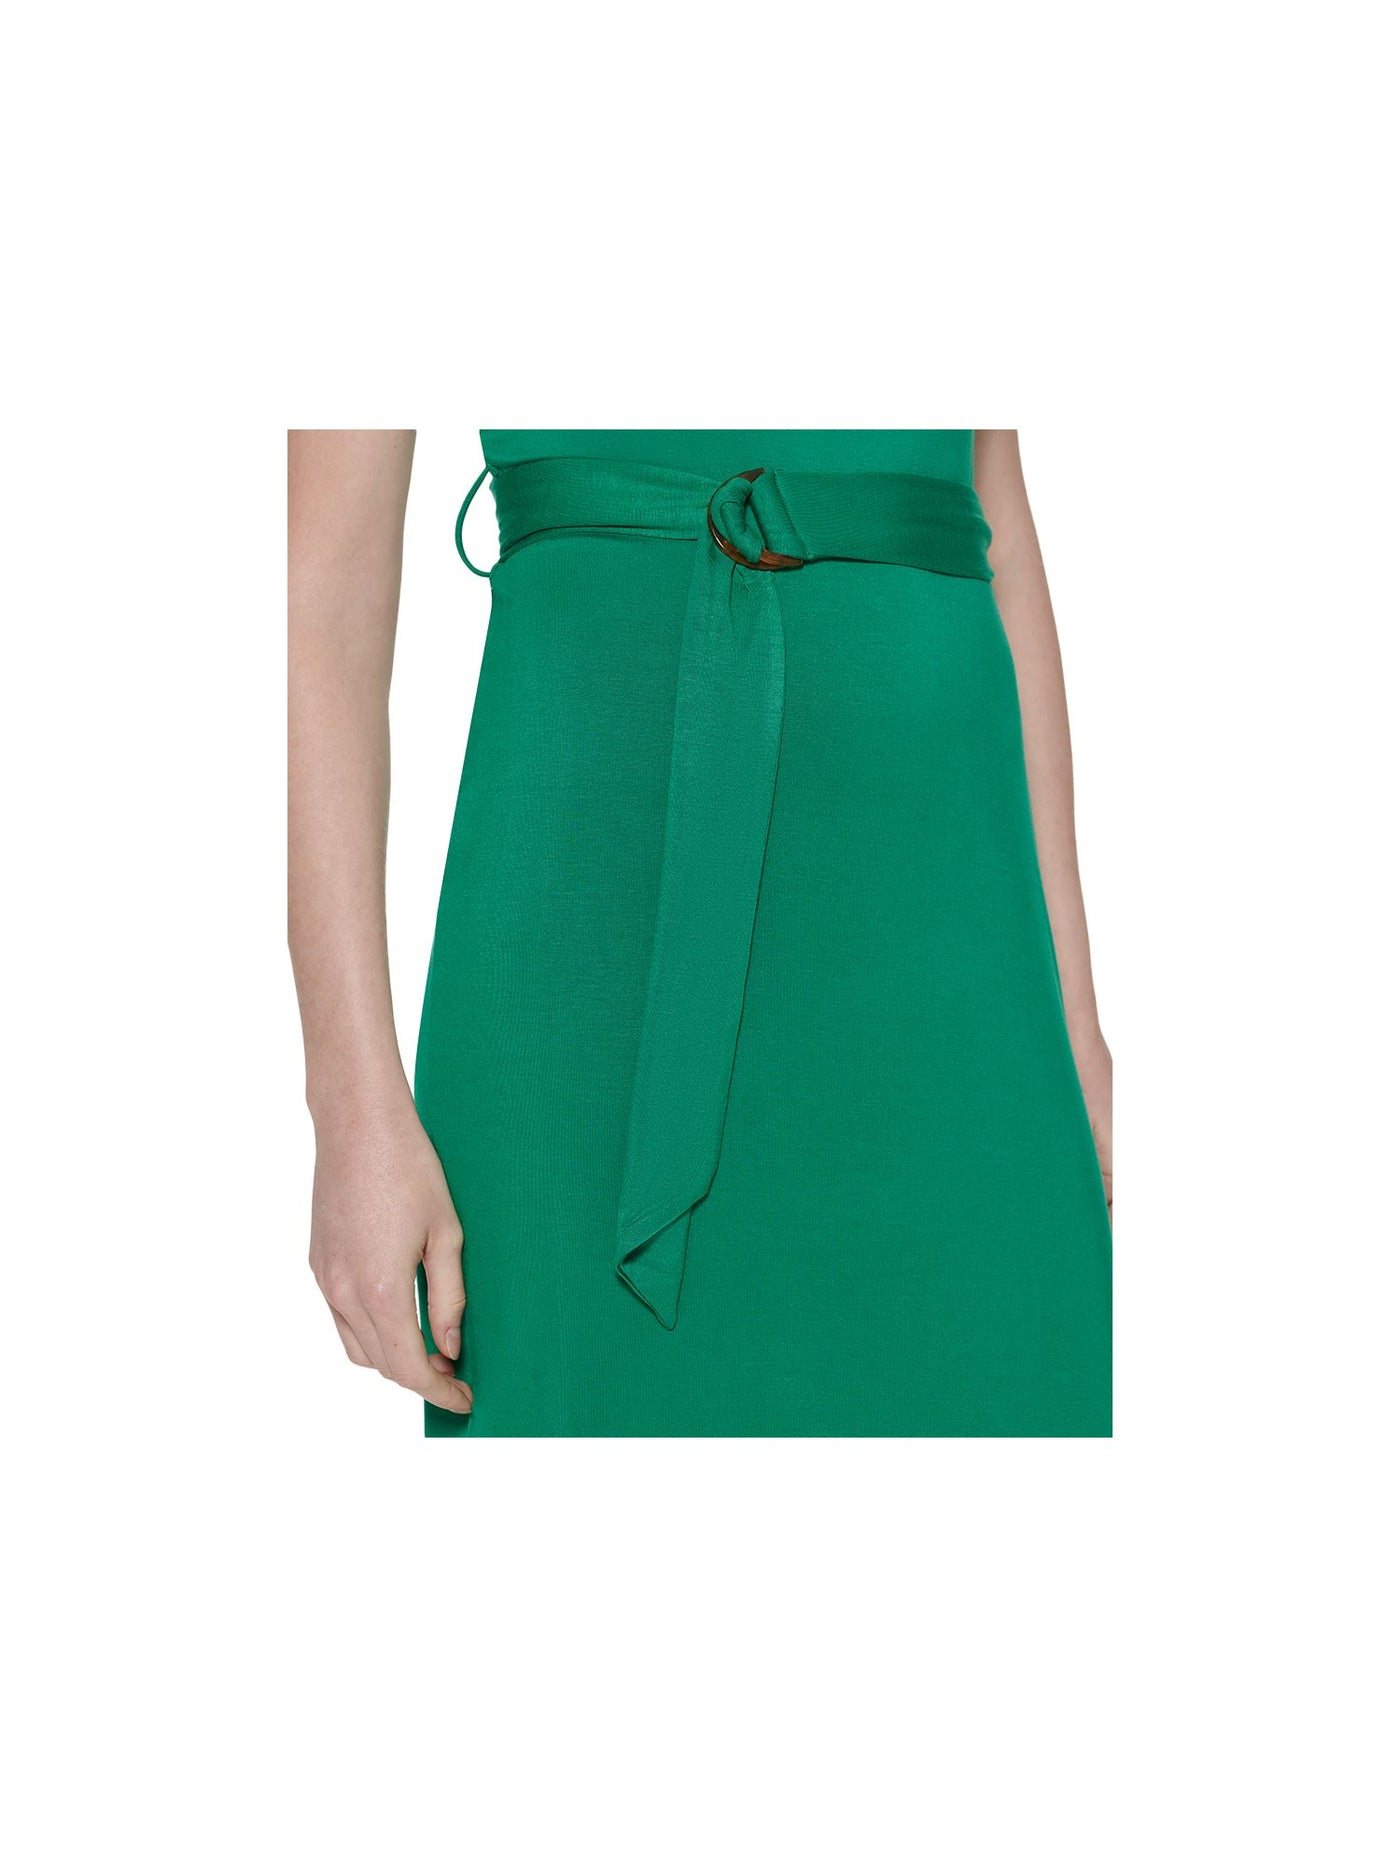 CALVIN KLEIN Womens Green Stretch Belted Unlined Sleeveless Boat Neck Above The Knee Wear To Work Sheath Dress 6